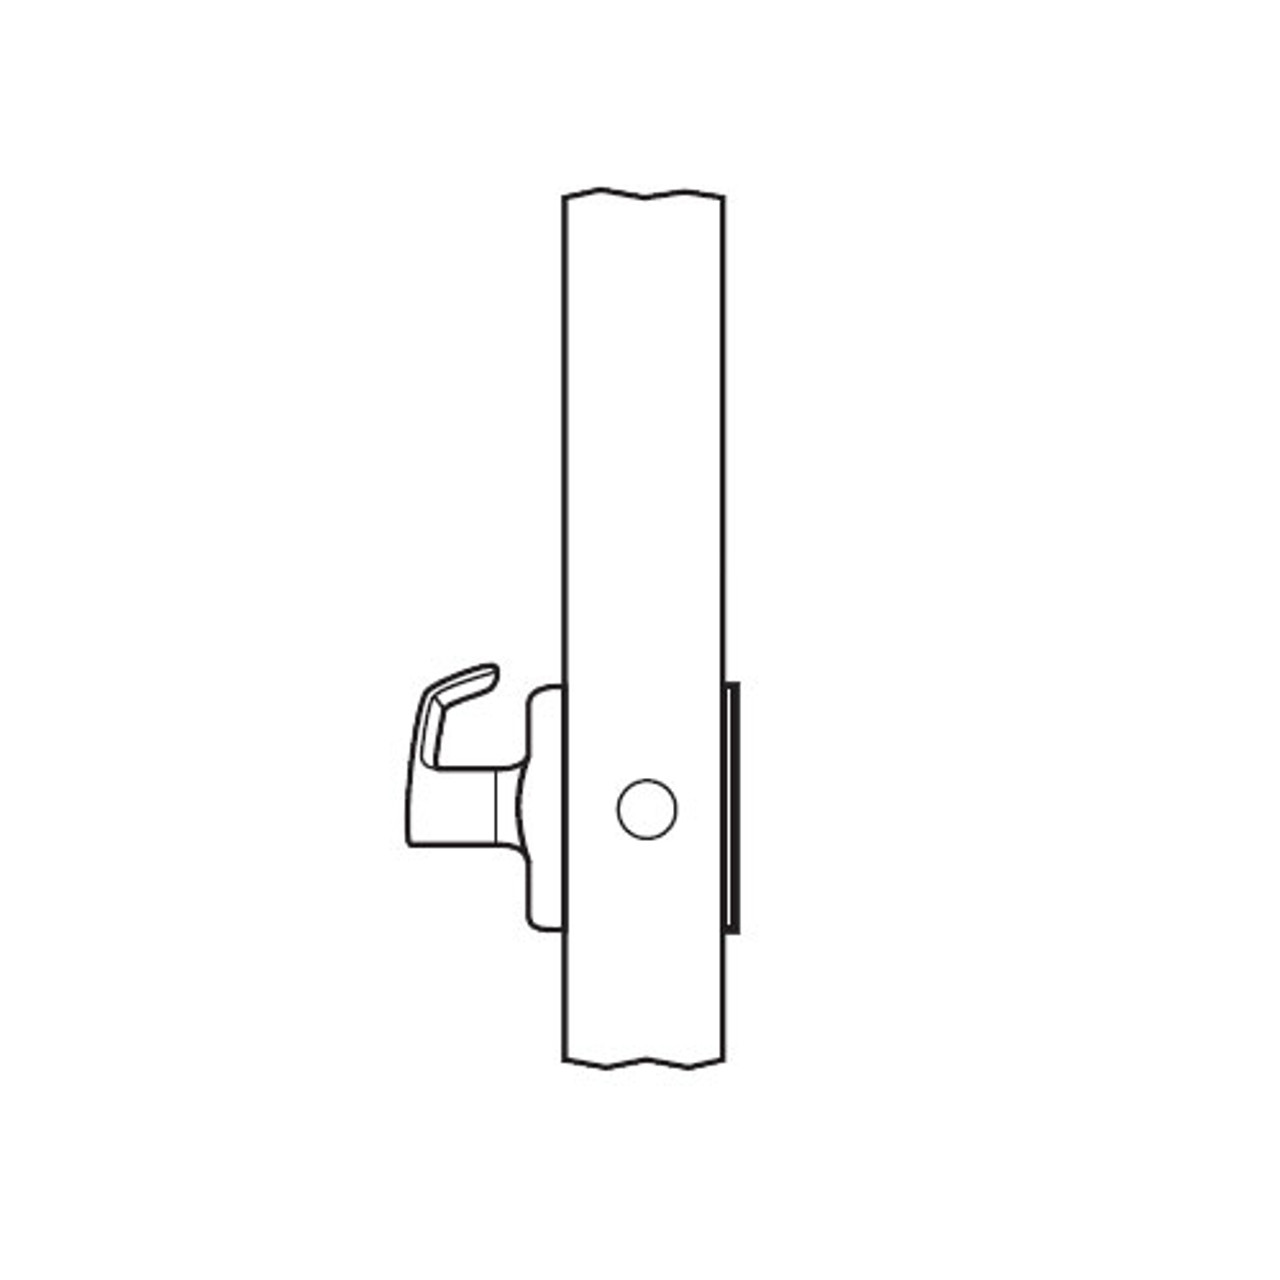 BM08-JH-03 Arrow Mortise Lock BM Series Single Dummy Lever with Javelin Design and H Escutcheon in Bright Brass